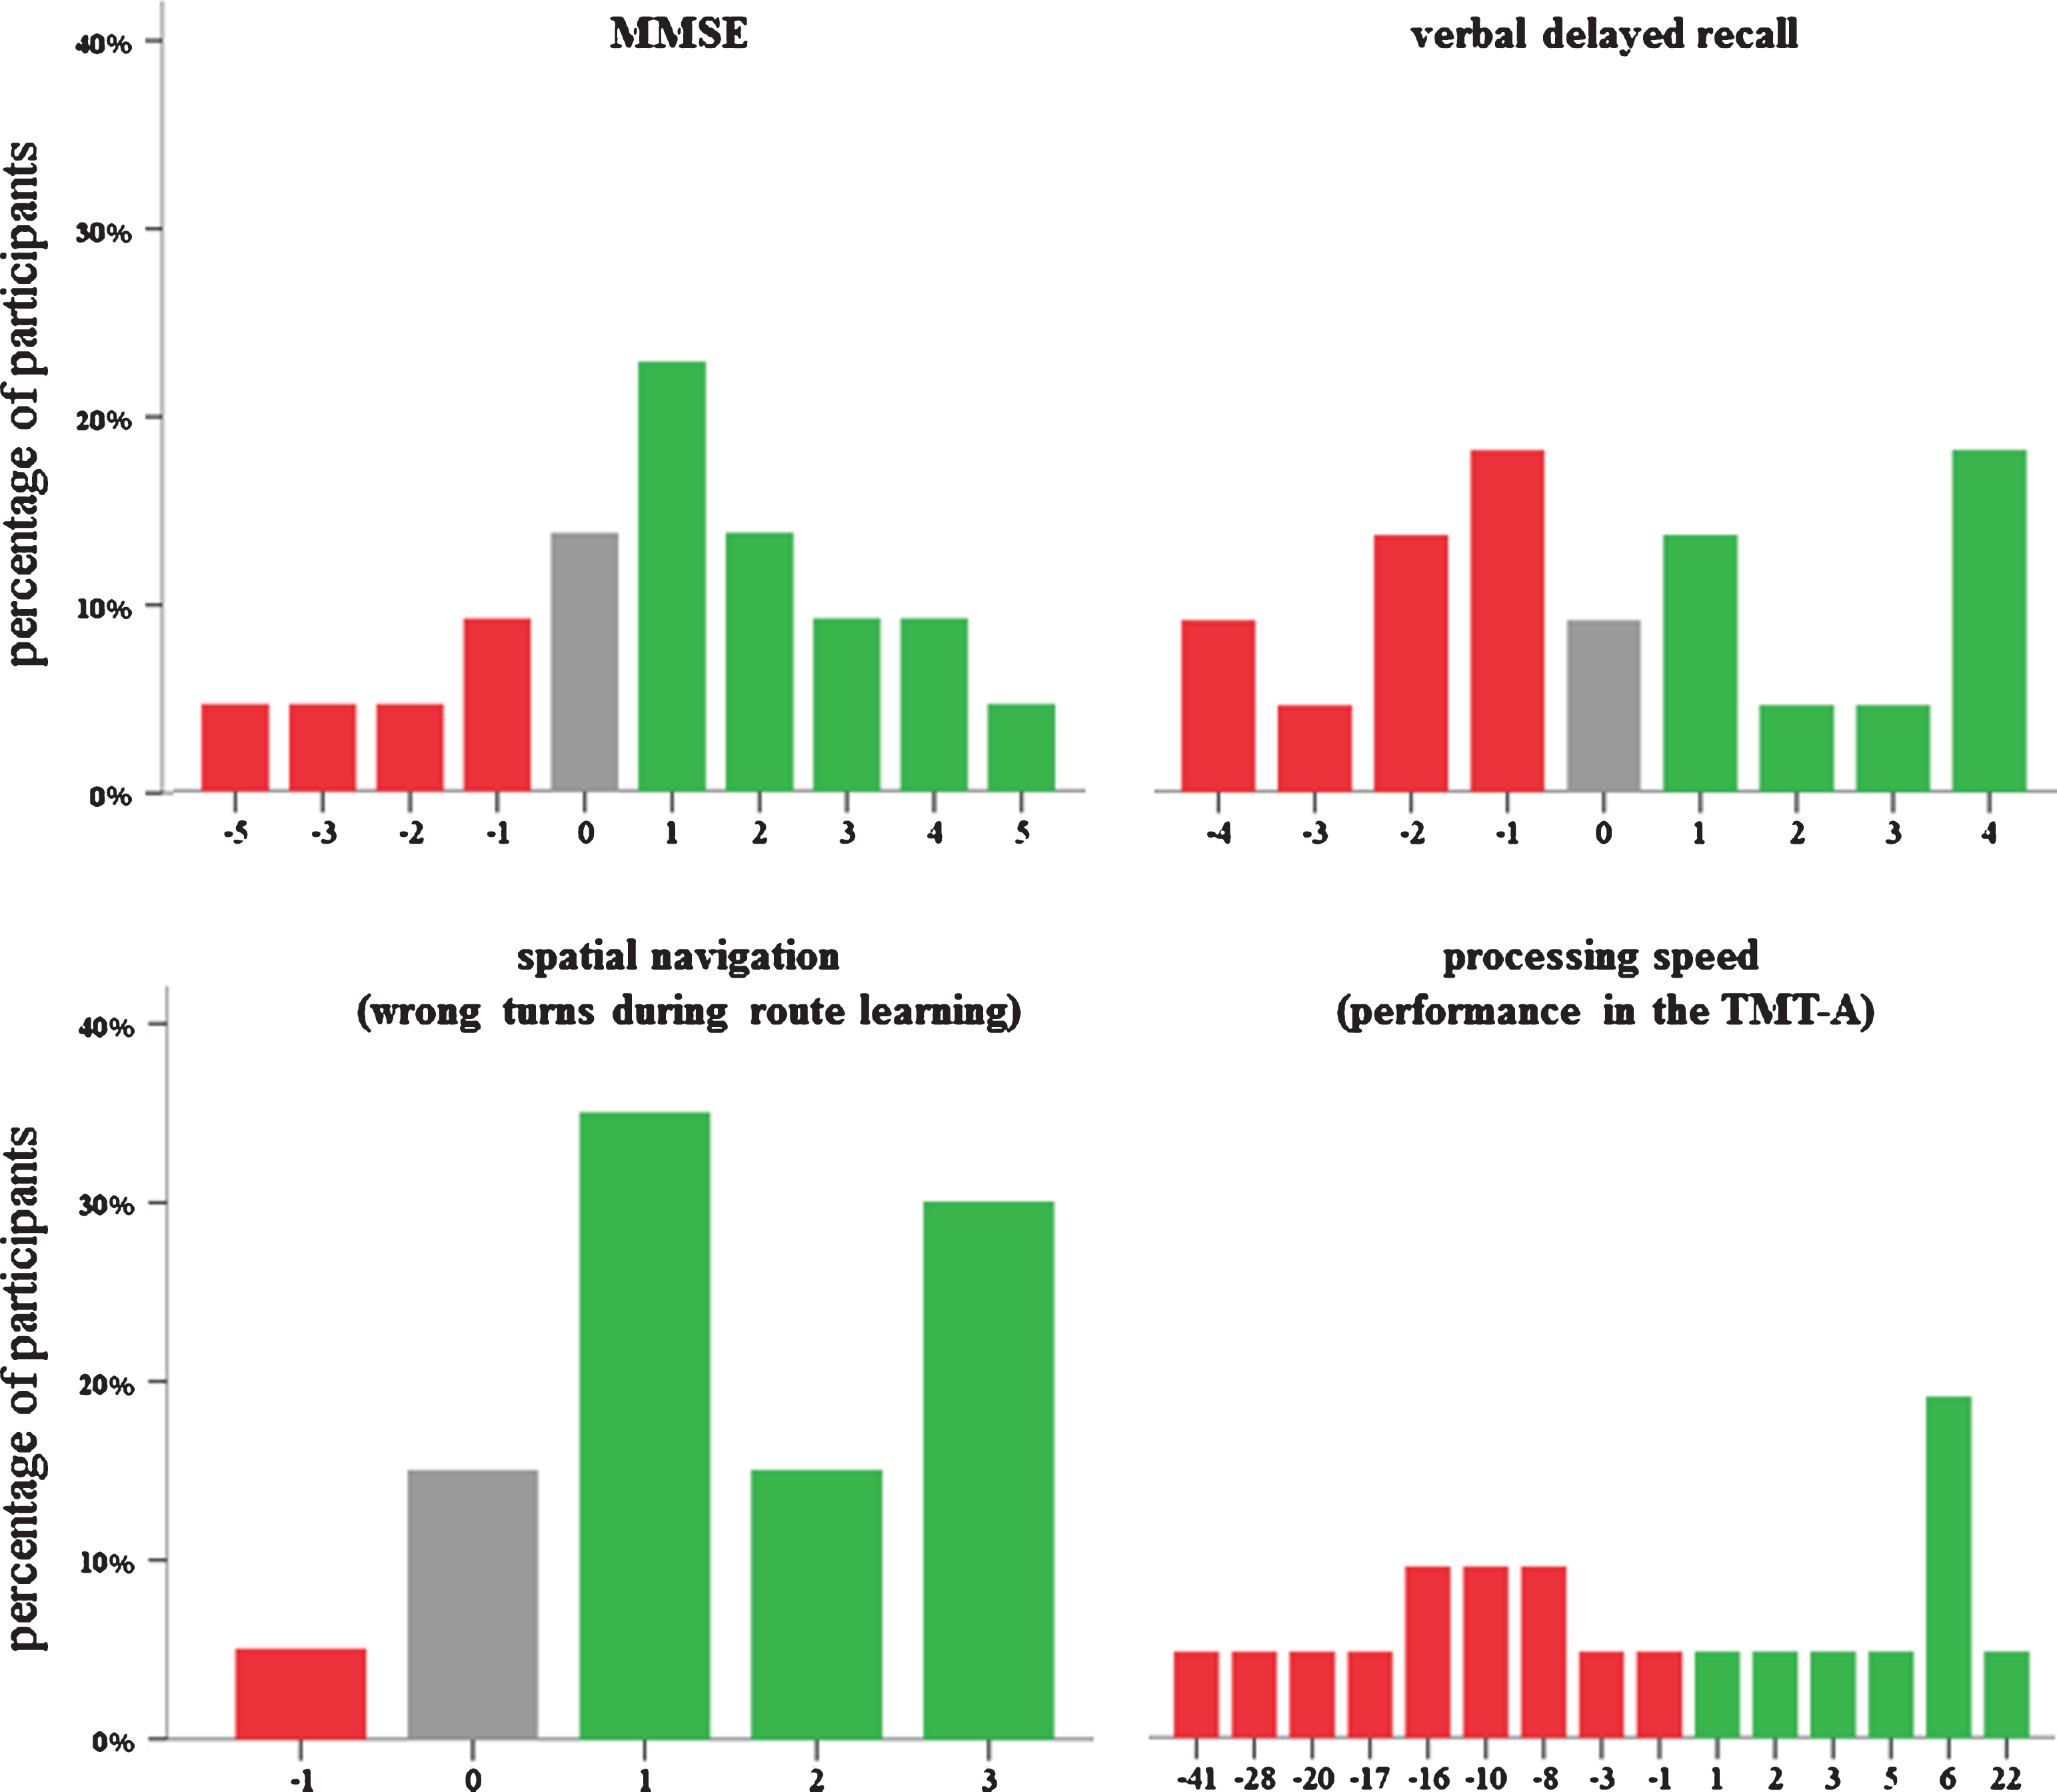 Variability in the response to cognitive training for the Mini-Mental Status Examination (MMSE), verbal delayed recall, spatial navigation, and processing speed in patients with mild cognitive impairment. Negative scores (red color) indicate decline from pre- to post-training, while positive scores (green color) depict an improvement. Note: For the TMT-A and spatial navigation, scores were recoded such that positive scores indicate an improvement, too.